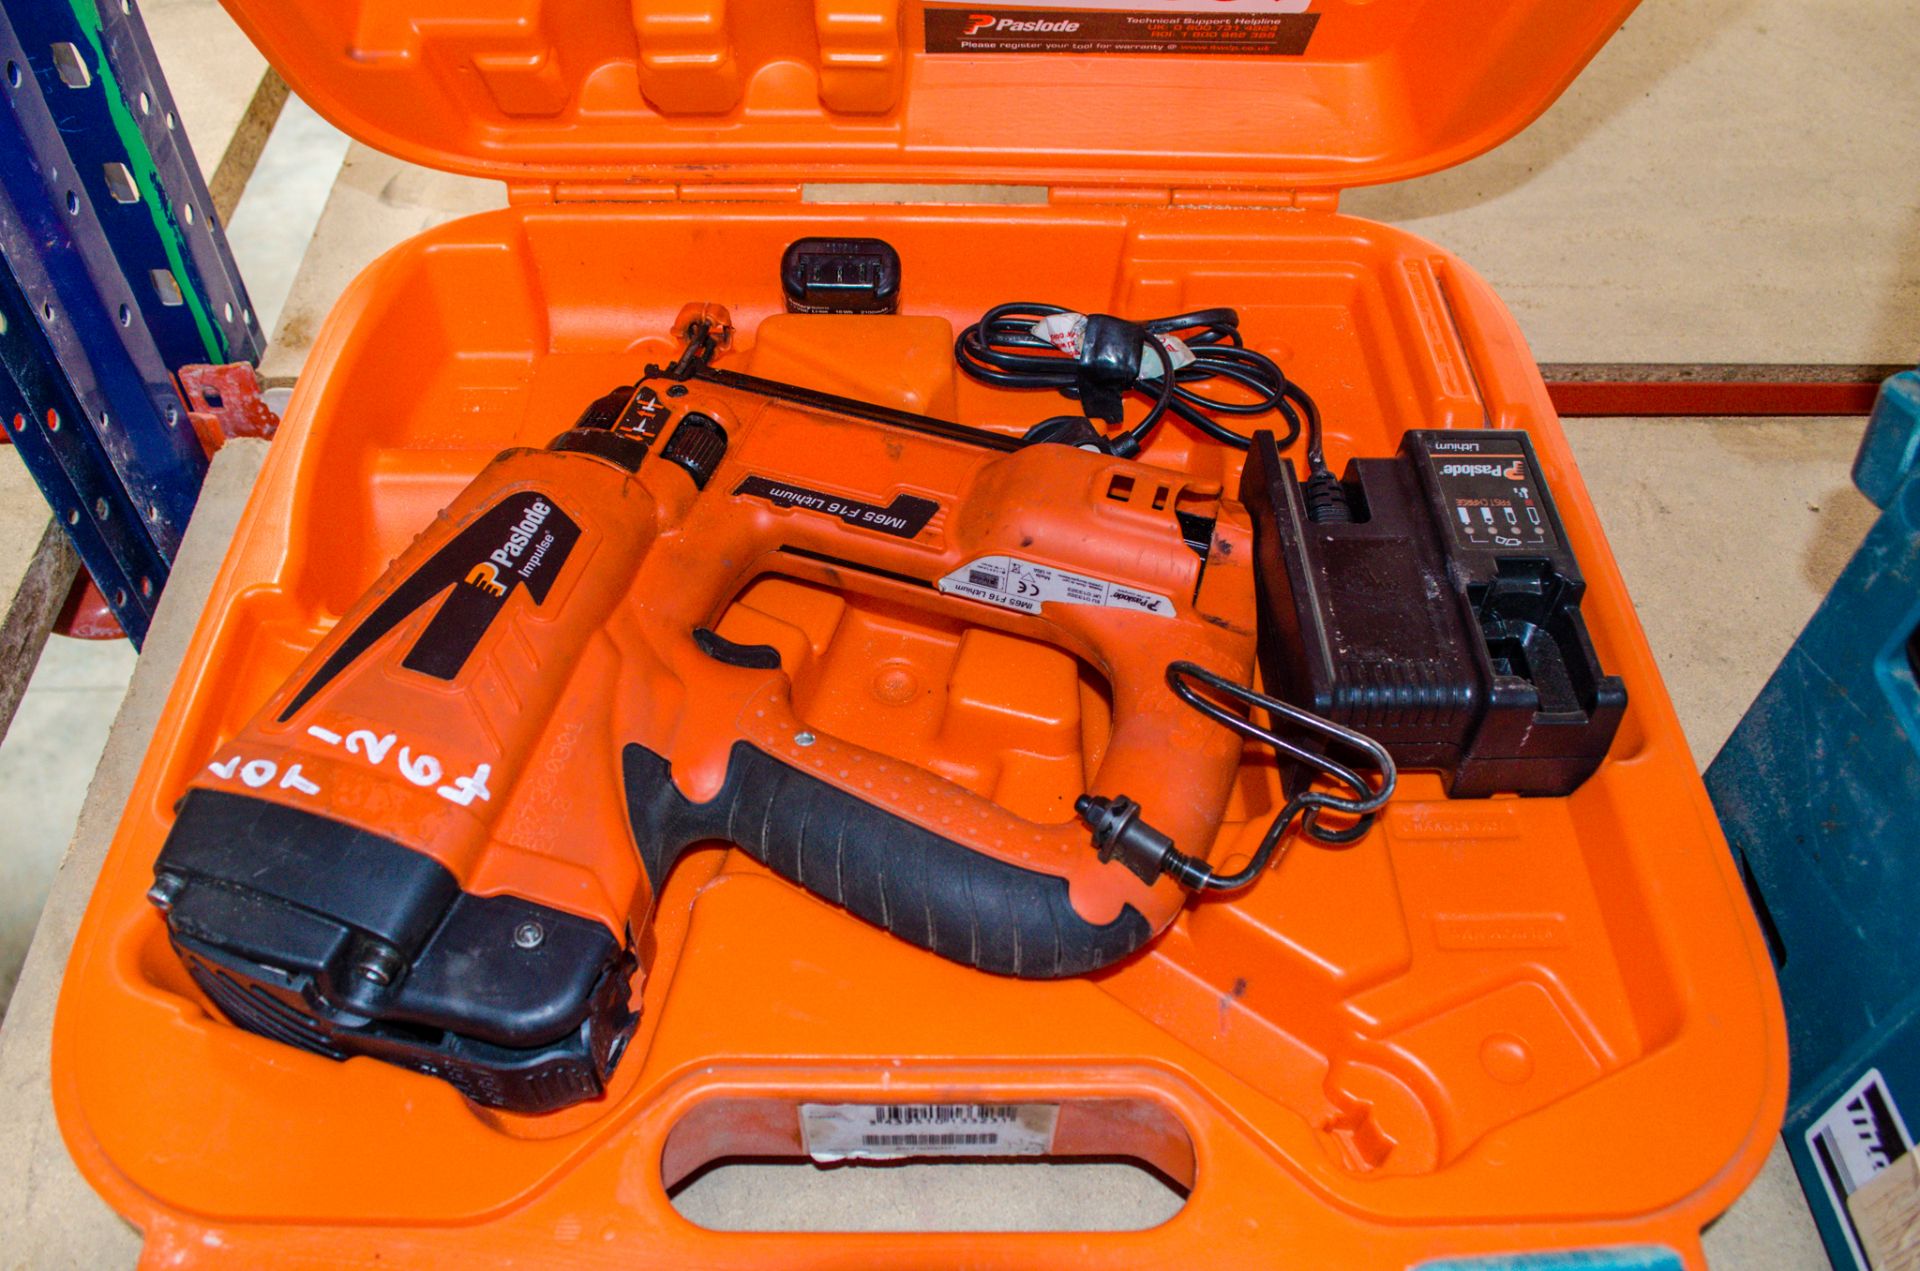 Paslode IM65 F16 cordless nail gun c/w battery, charger and carry case A986390